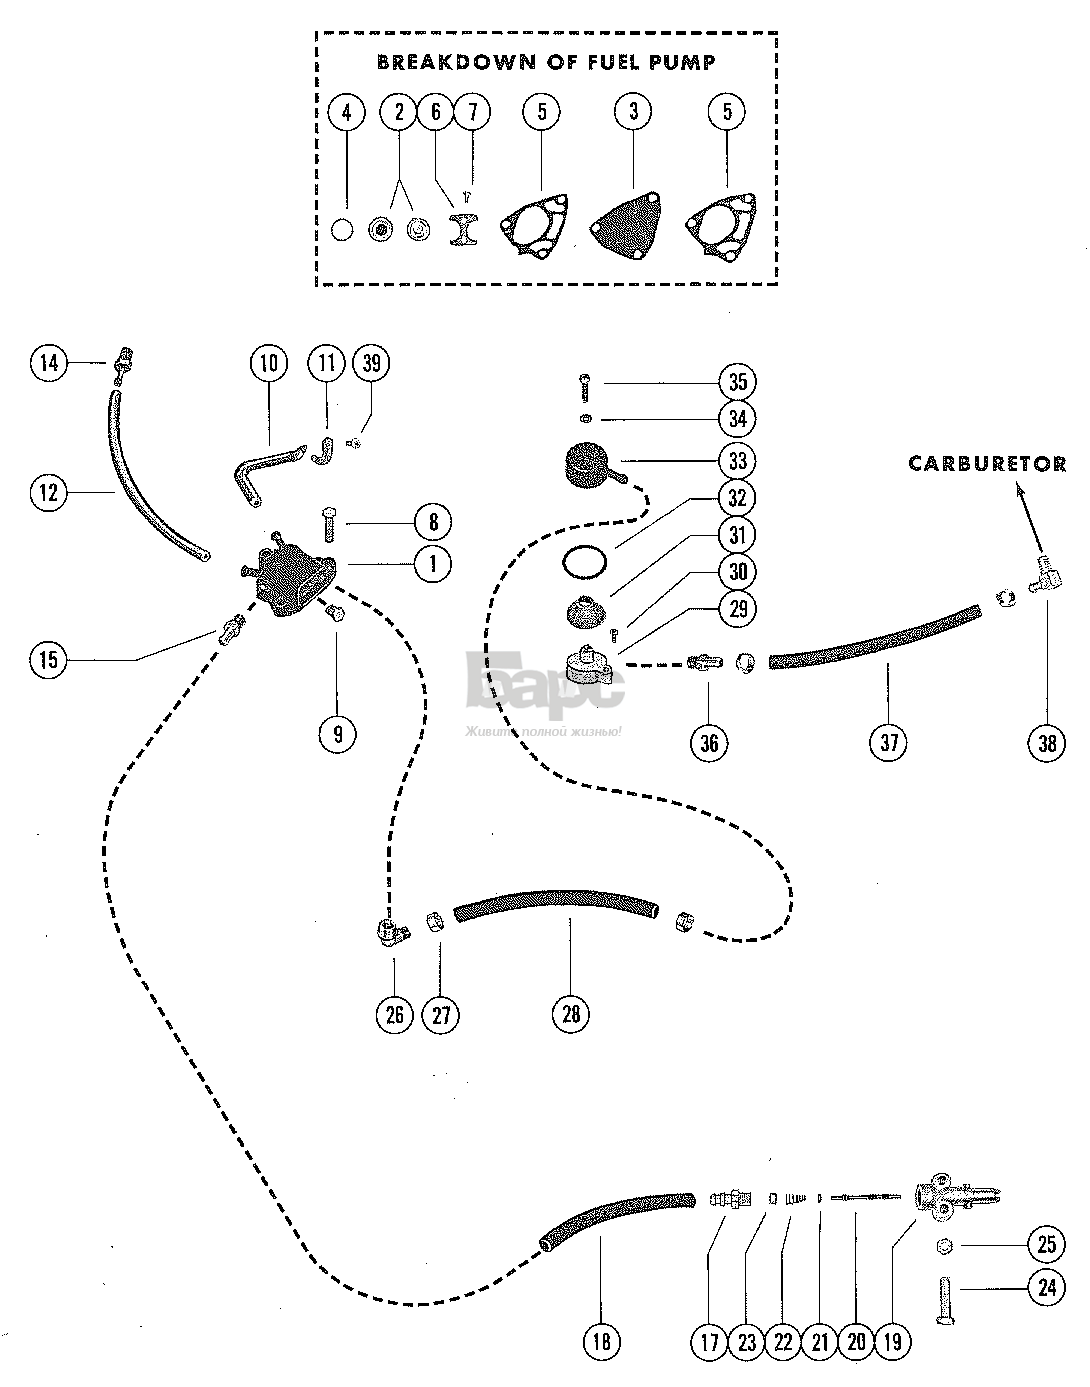 FUEL PUMP ASSEMBLY AND FUEL LINES